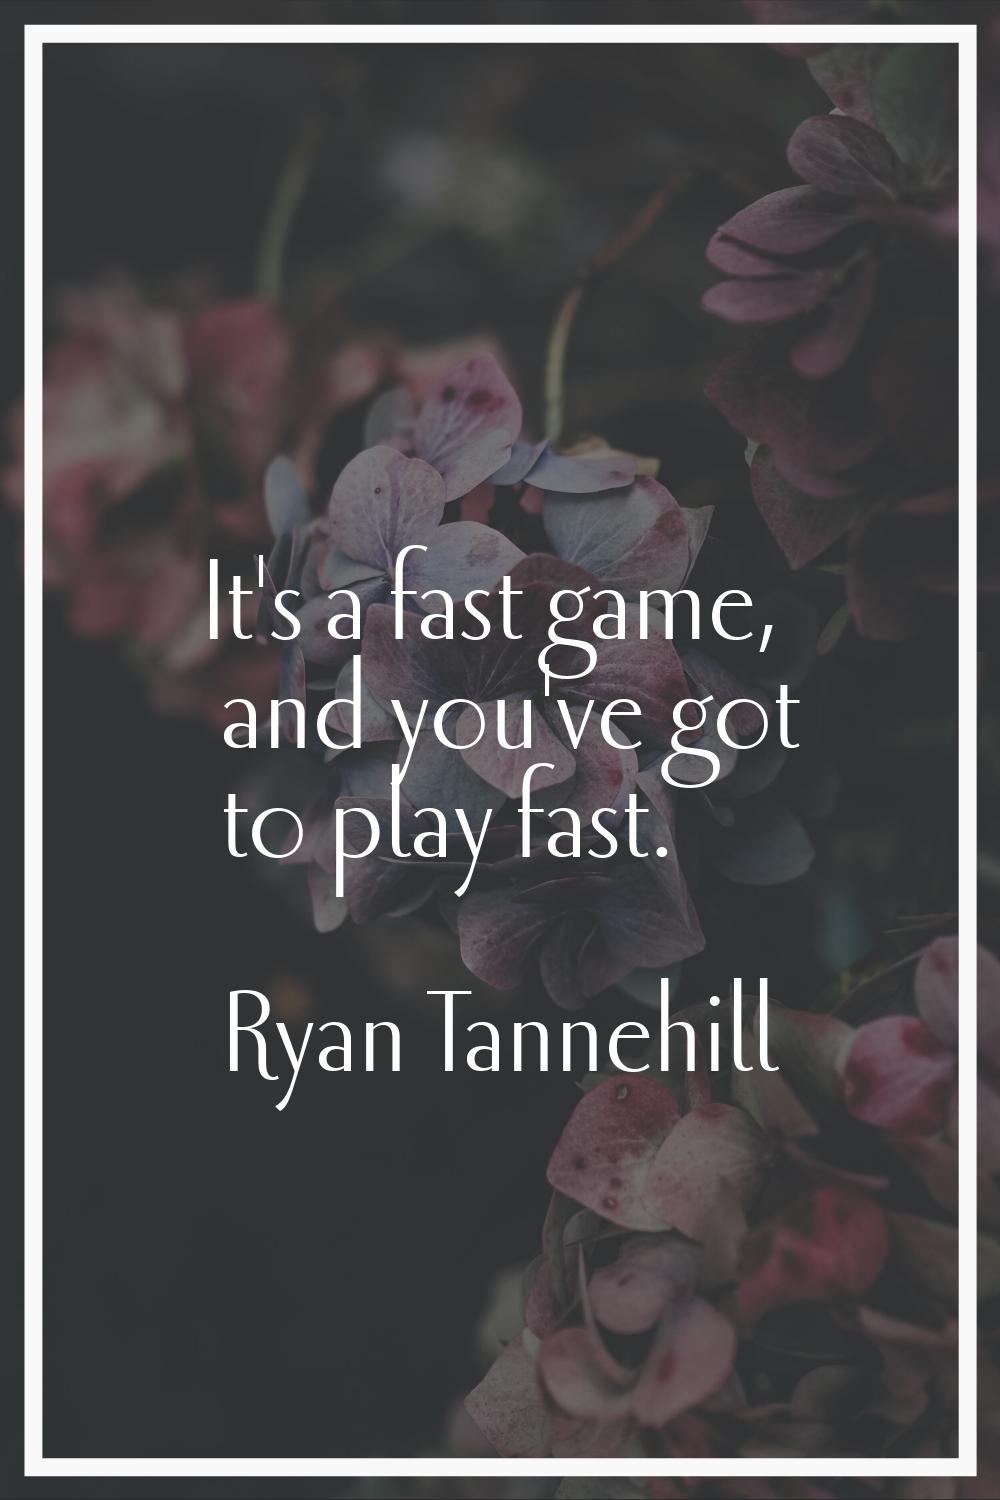 It's a fast game, and you've got to play fast.